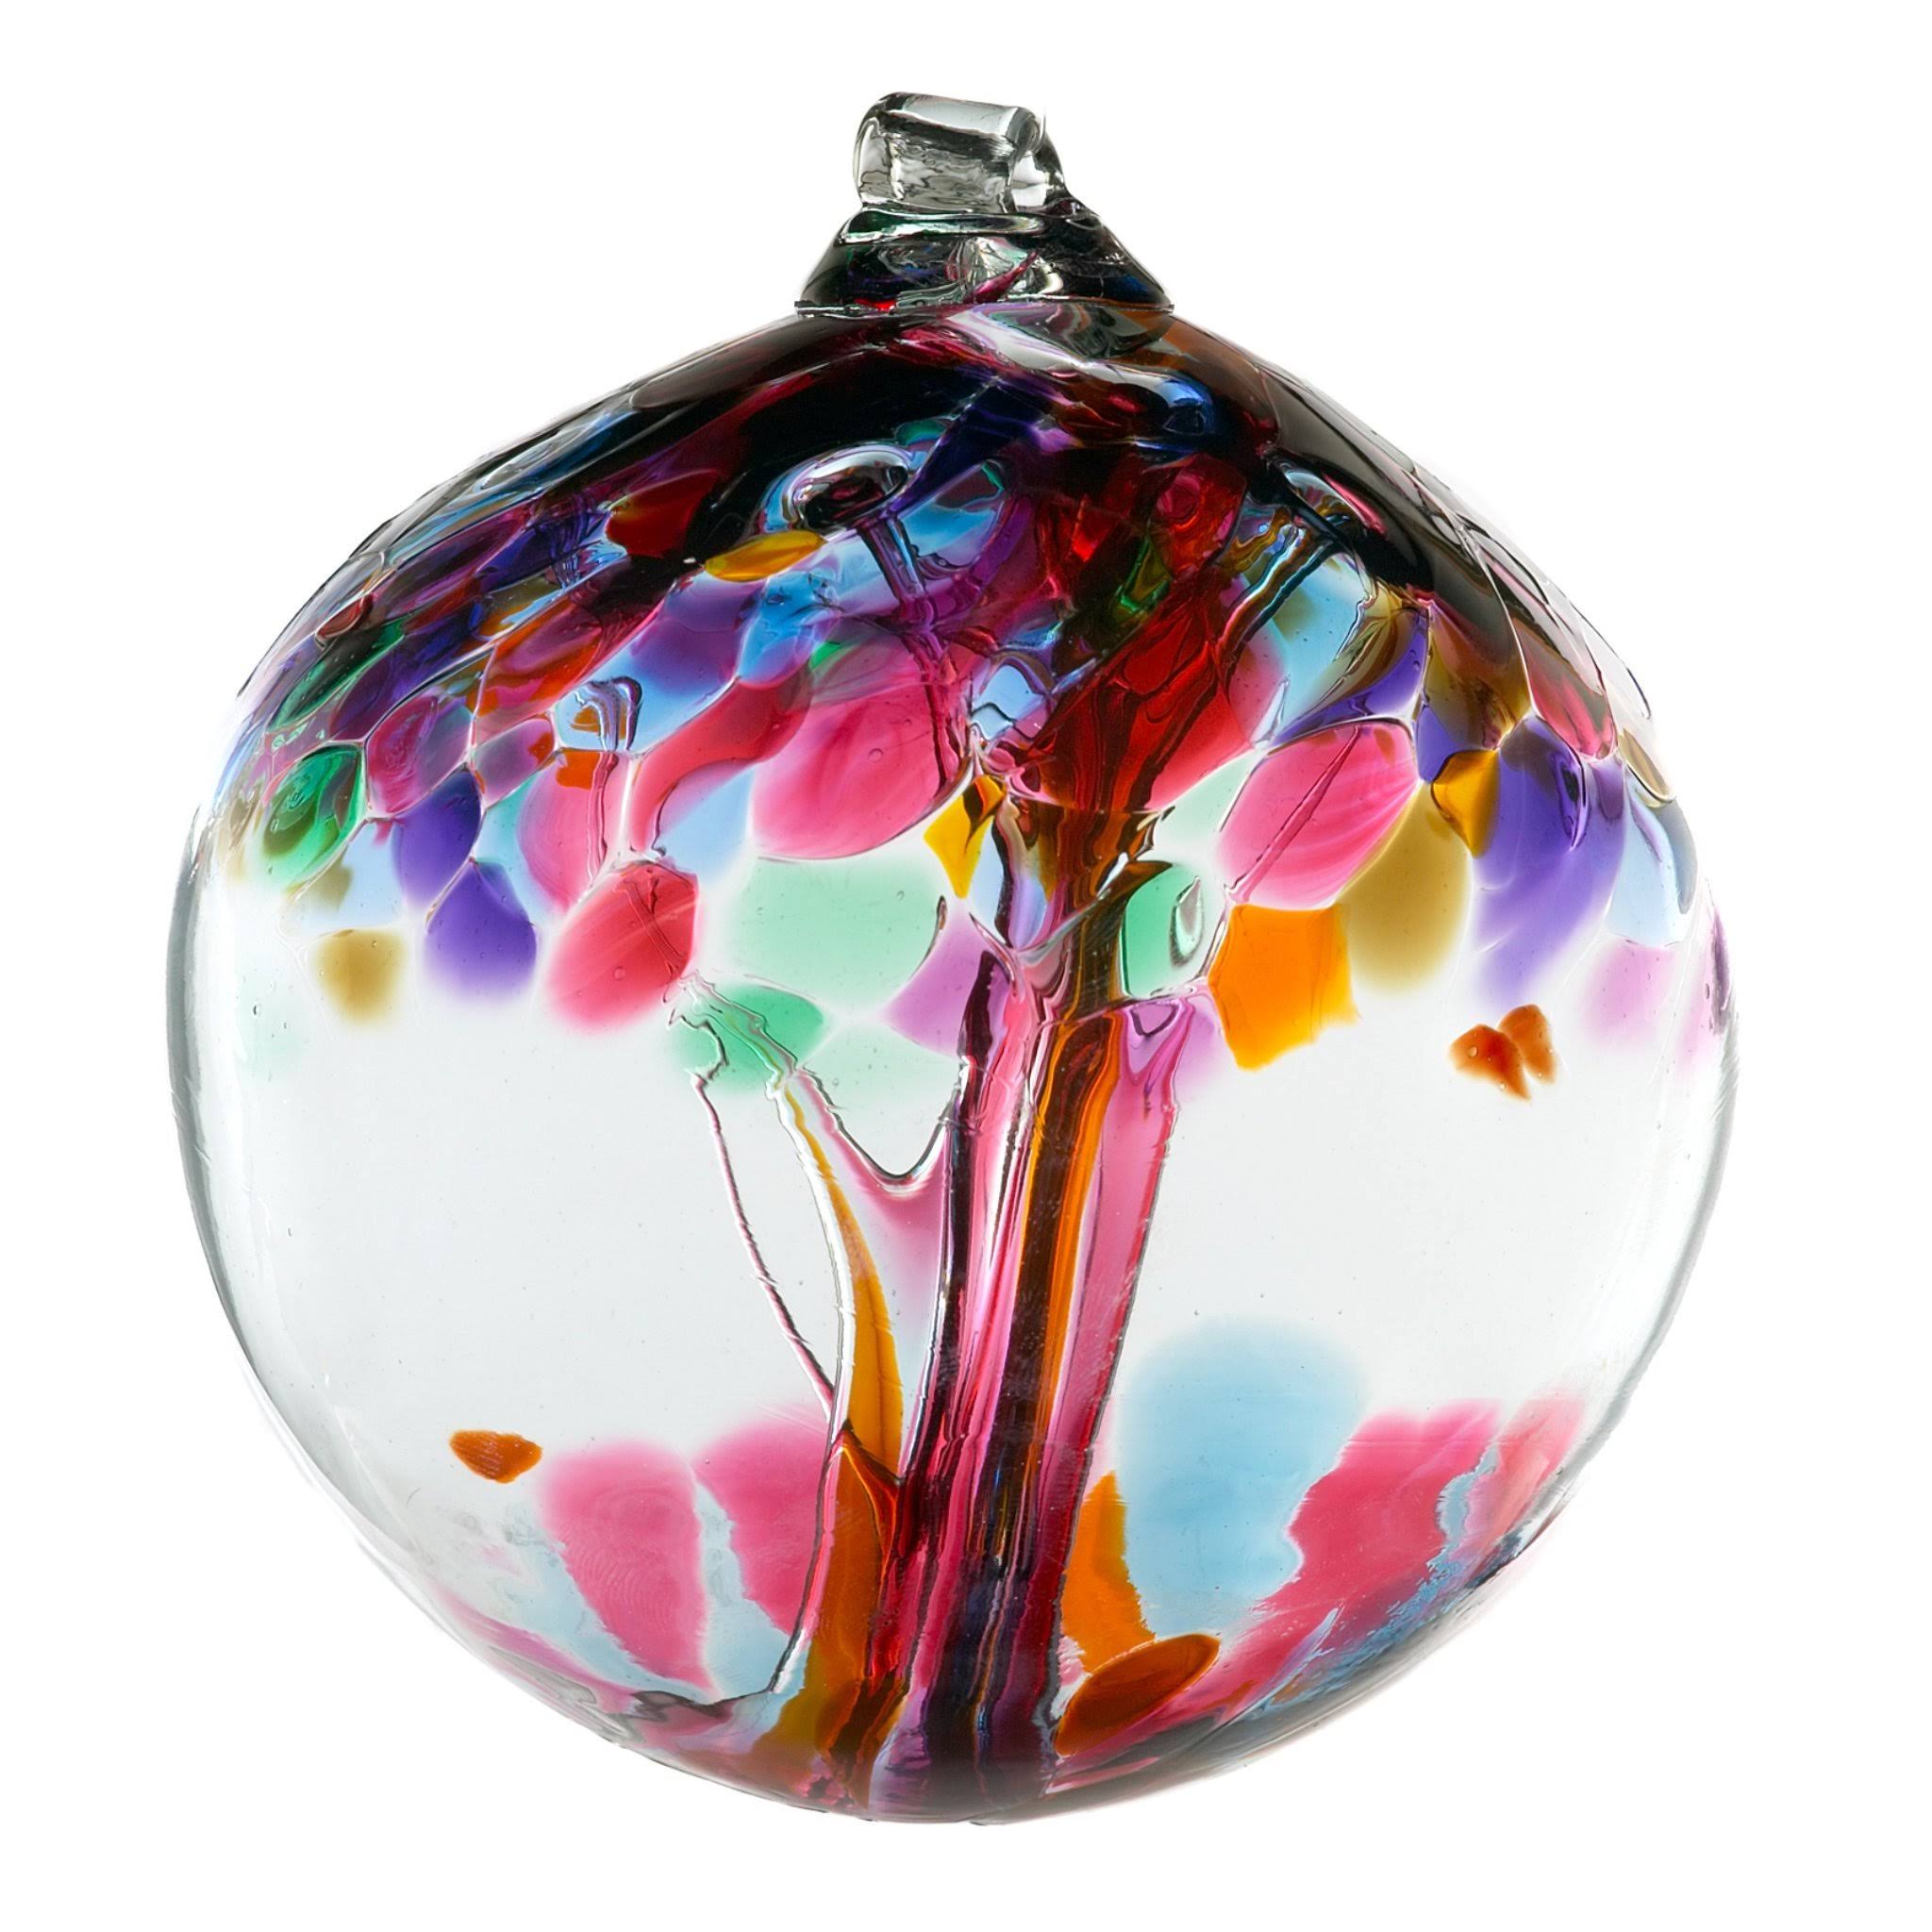 Recycled Glass Tree Globes - Relationships - Friendship | Unique Gifts for the Family